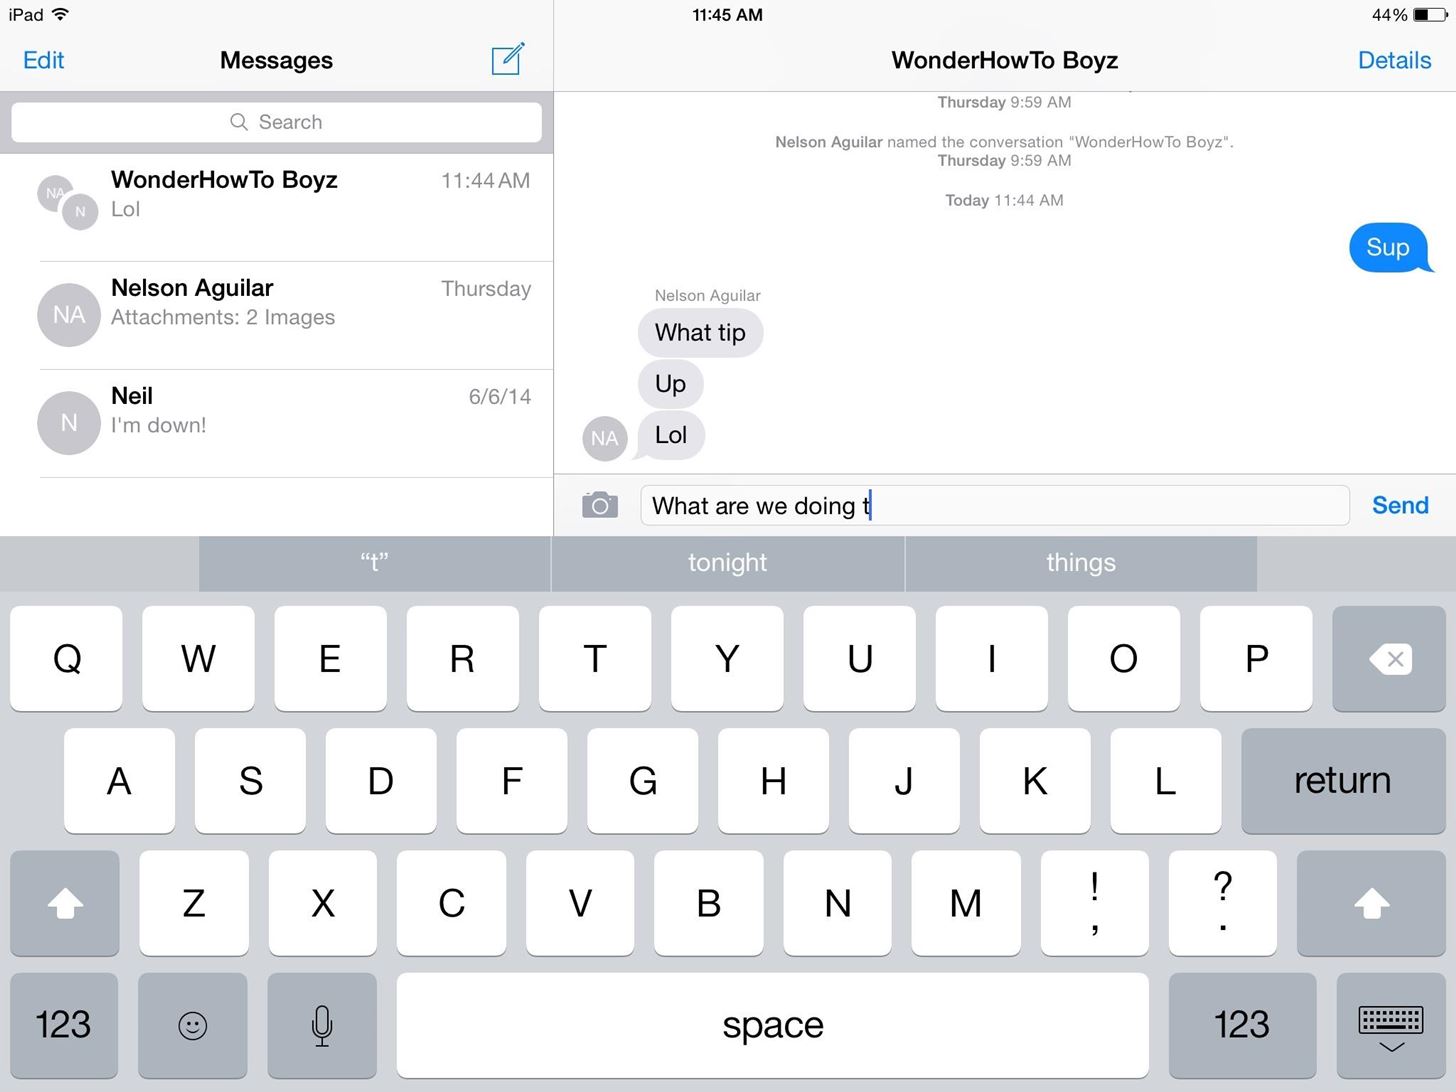 Everything You Need to Know About iOS 8 Beta 2 for iPhone, iPad, & iPod Touch